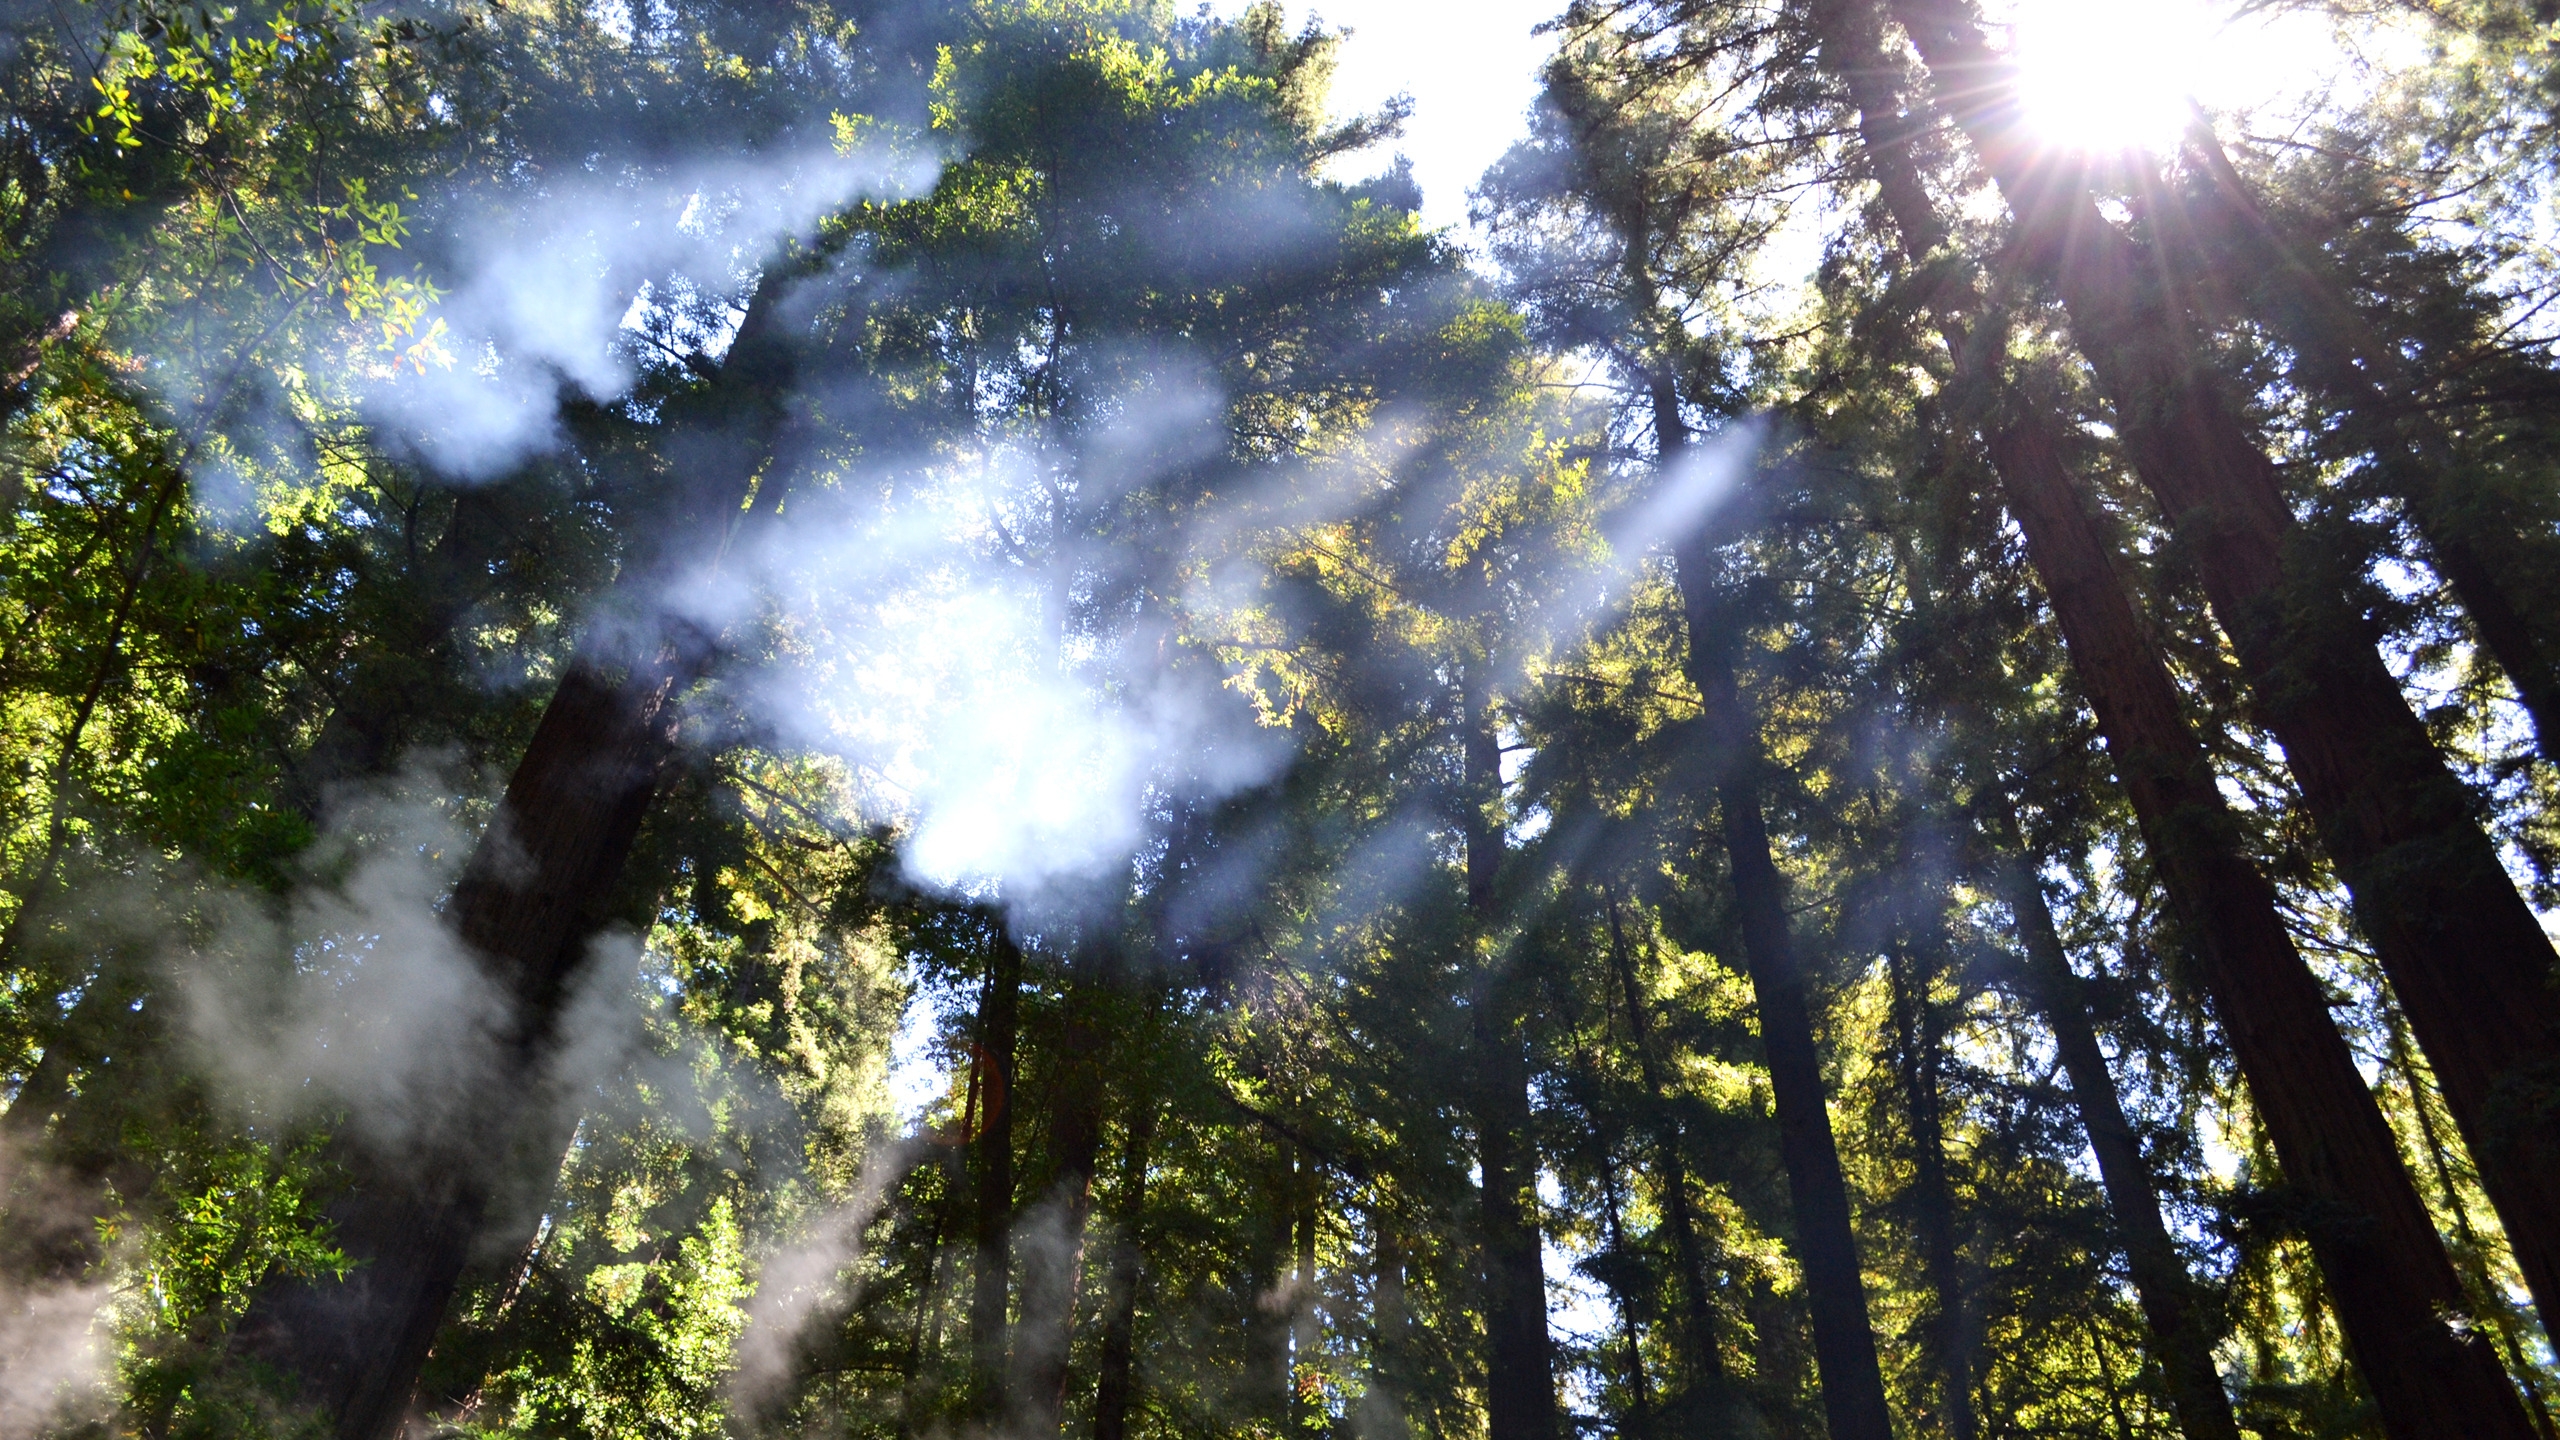 Breaking through the Trees for 2560x1440 HDTV resolution